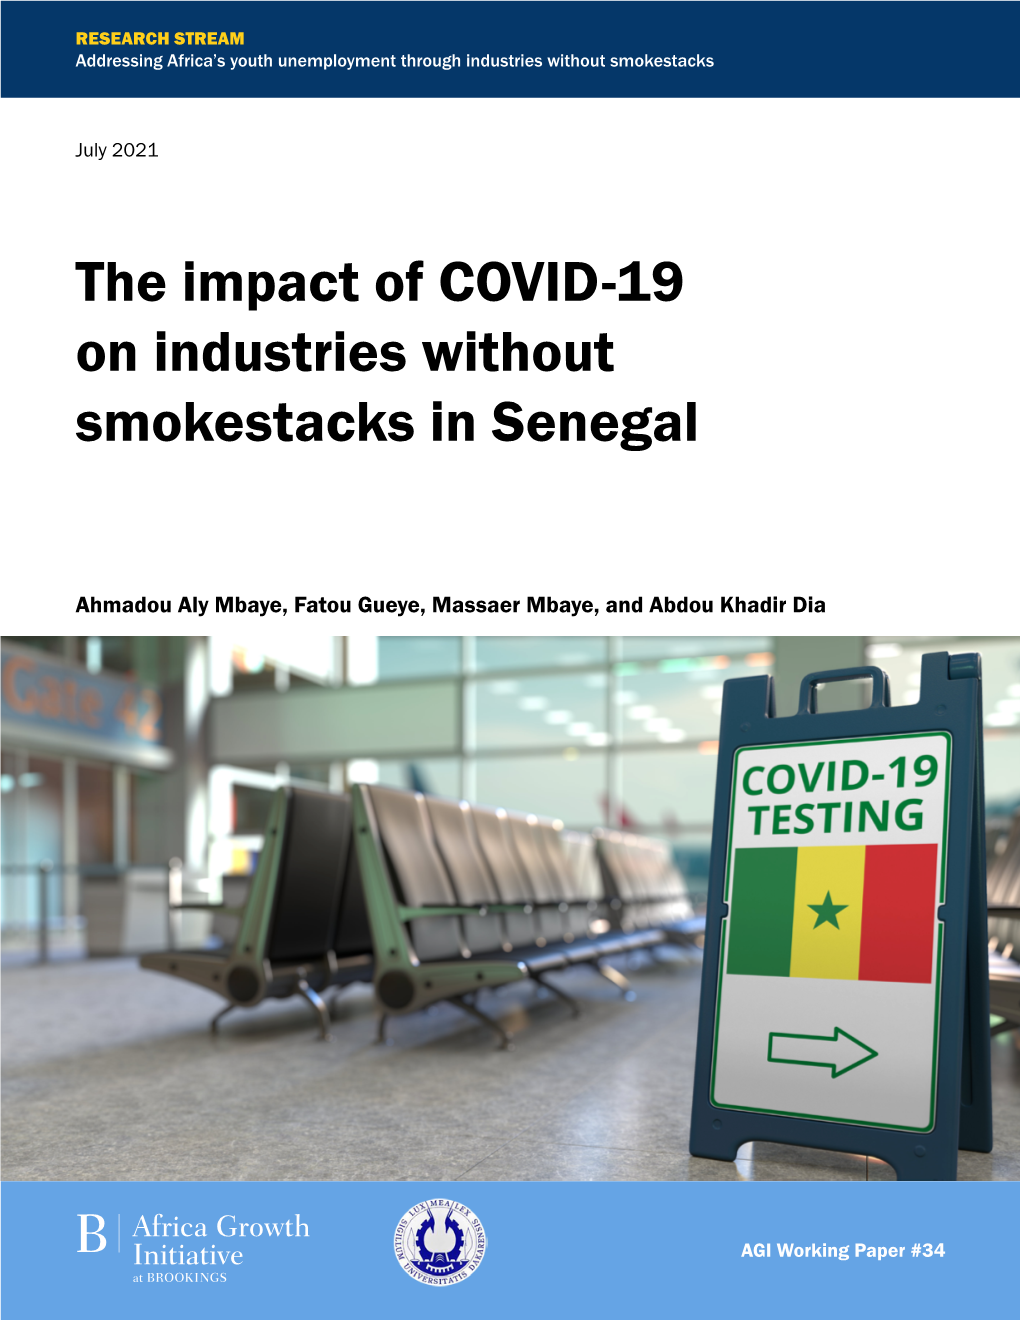 The Impact of COVID-19 on Industries Without Smokestacks in Senegal